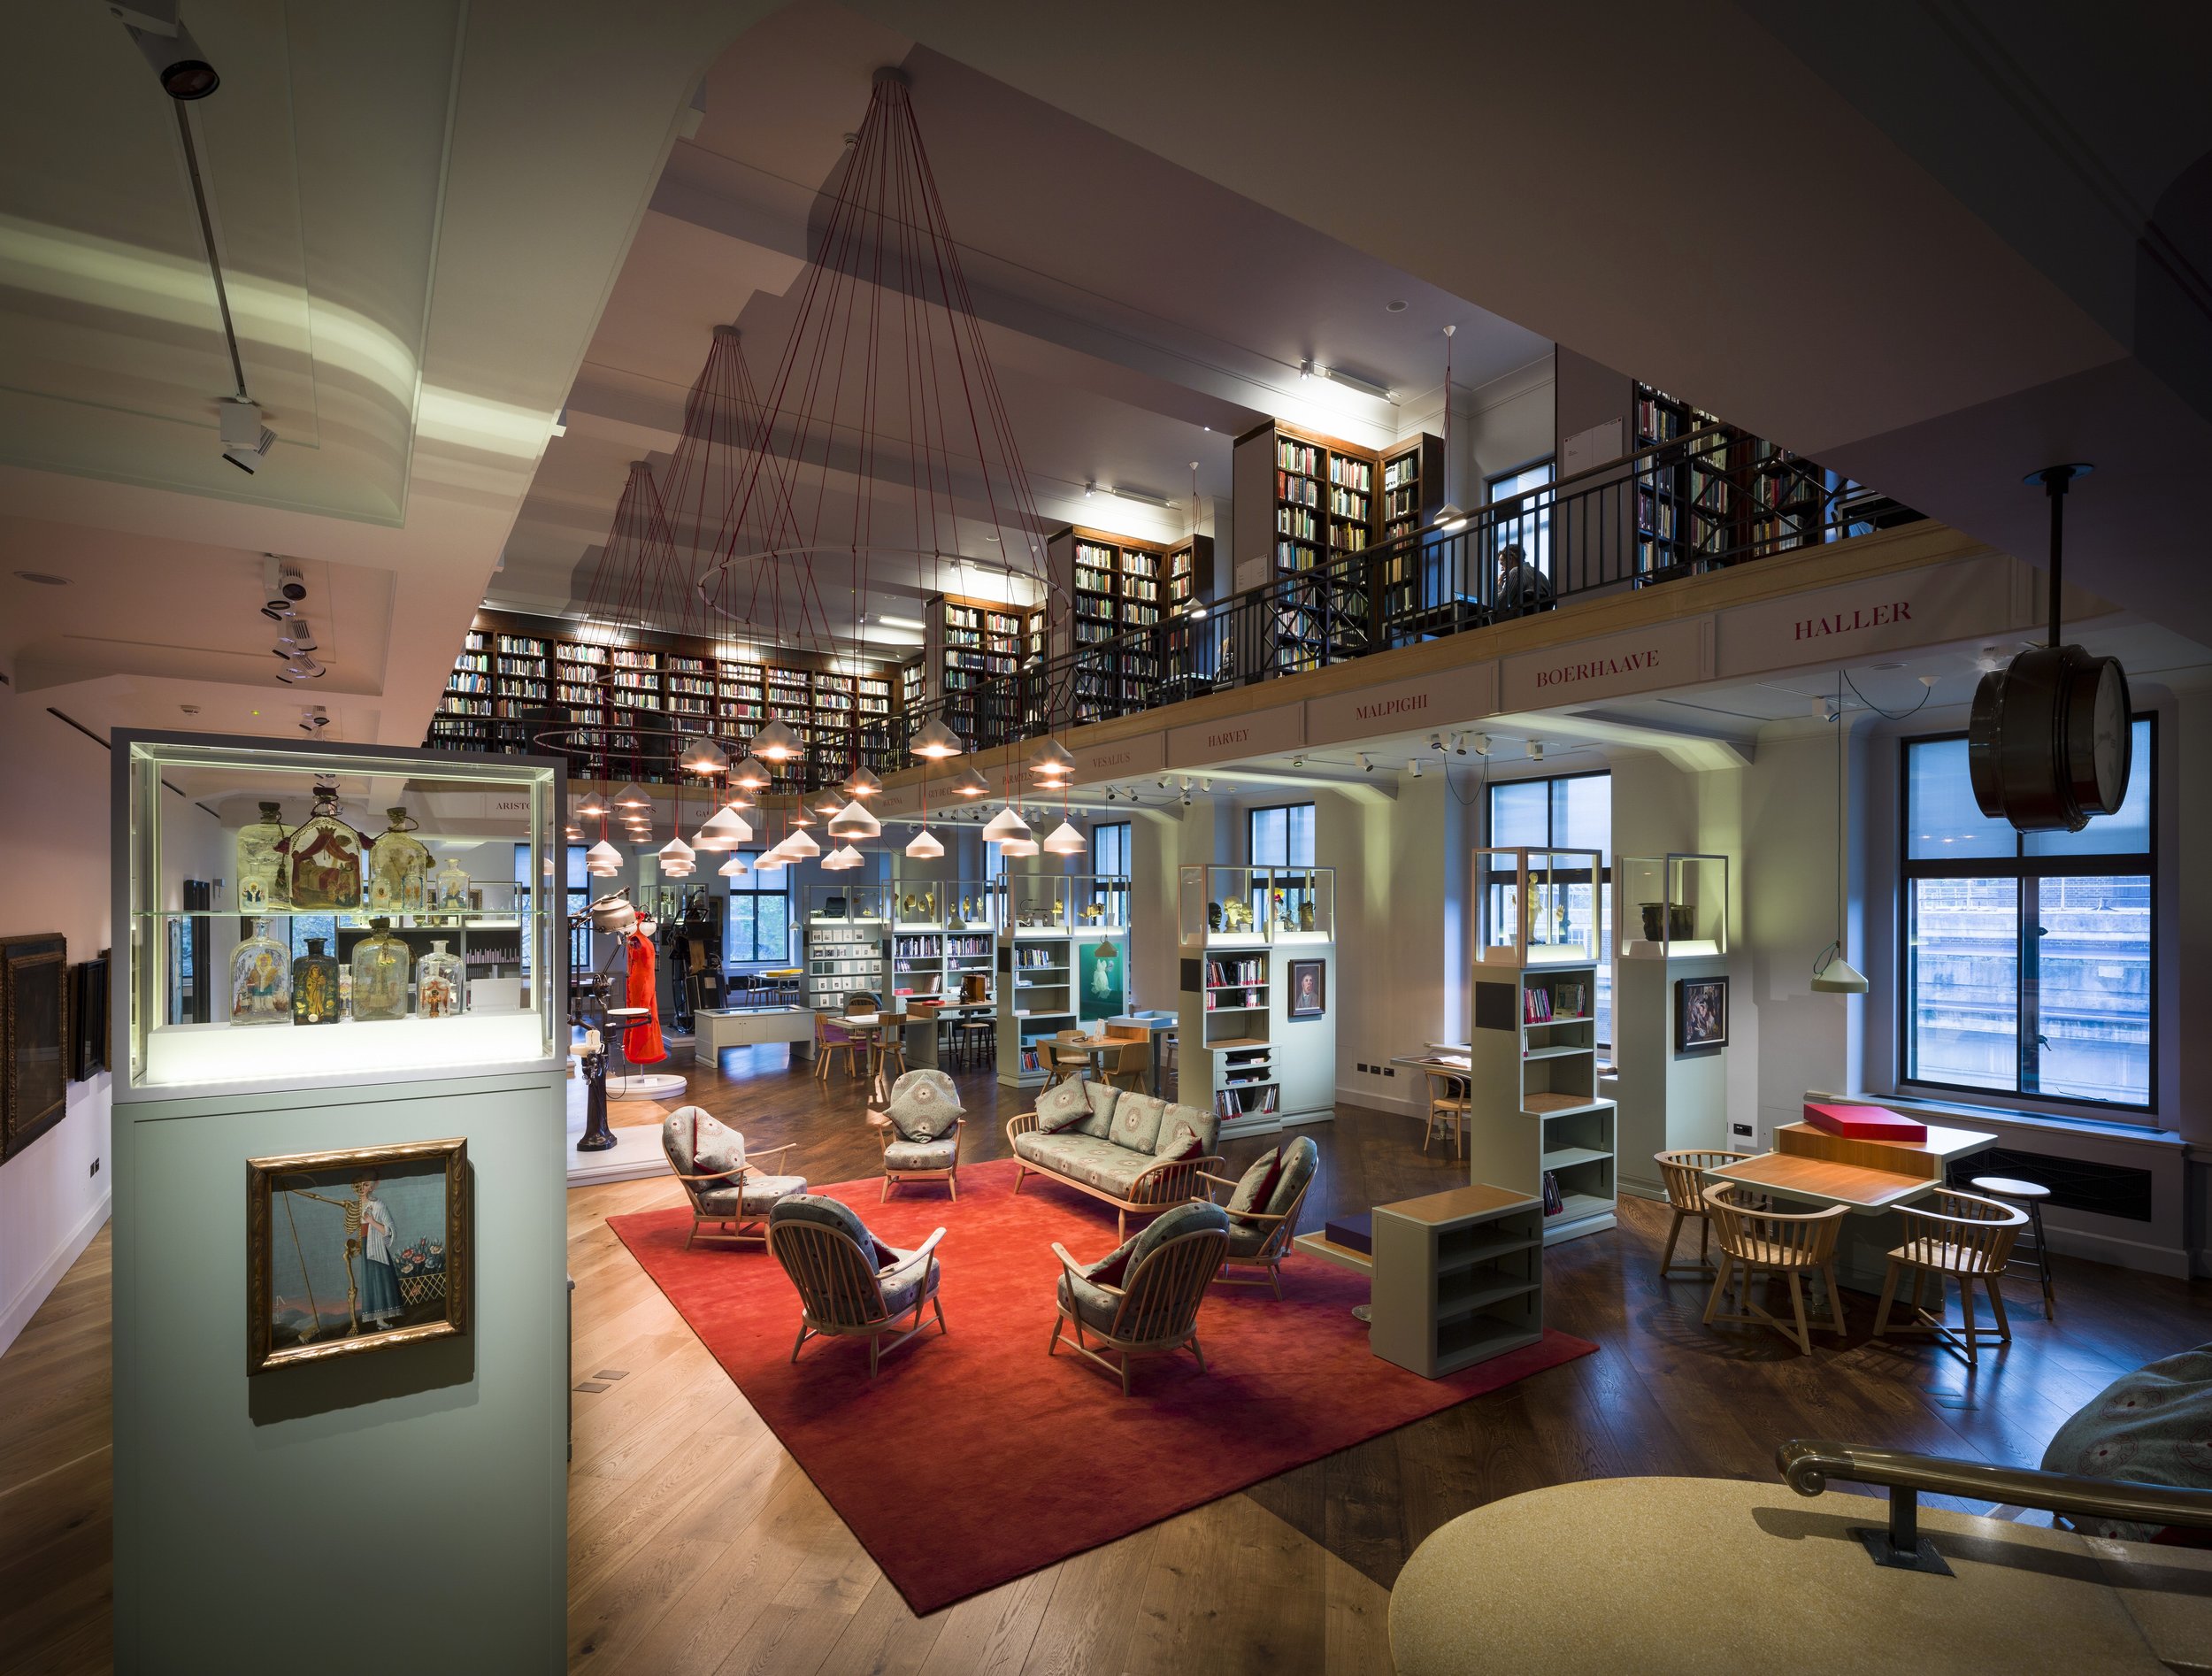 The reimagined Reading Room © Wellcome Trust